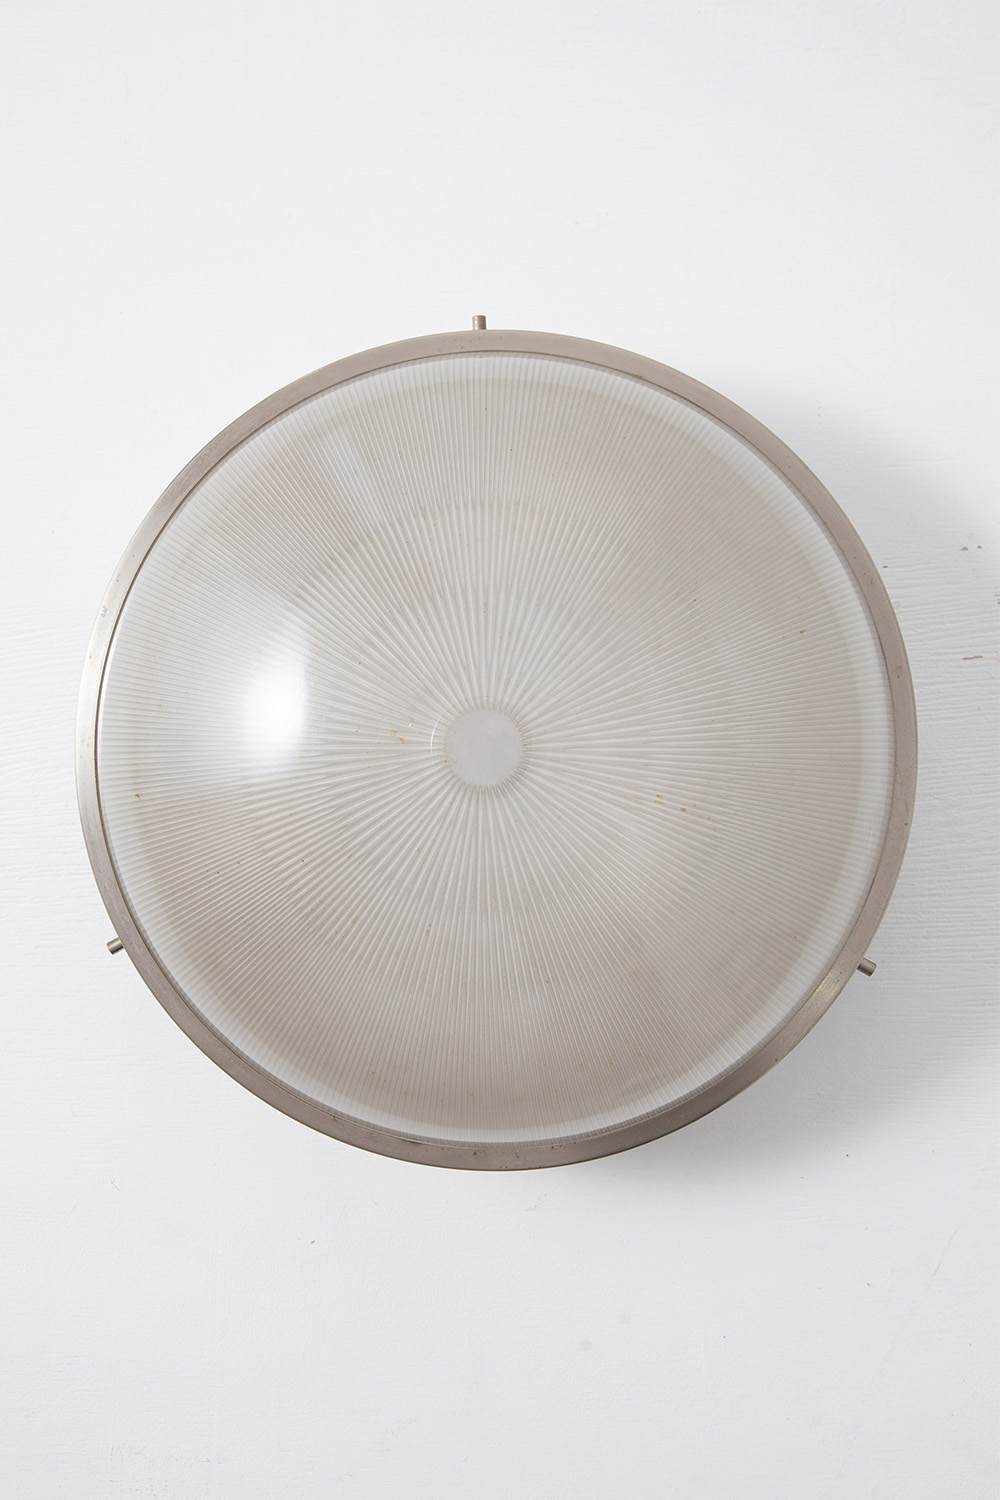 ‘Sigma’ Wall Ceiling Lamp by Sergio Mazza , Large for Artemide